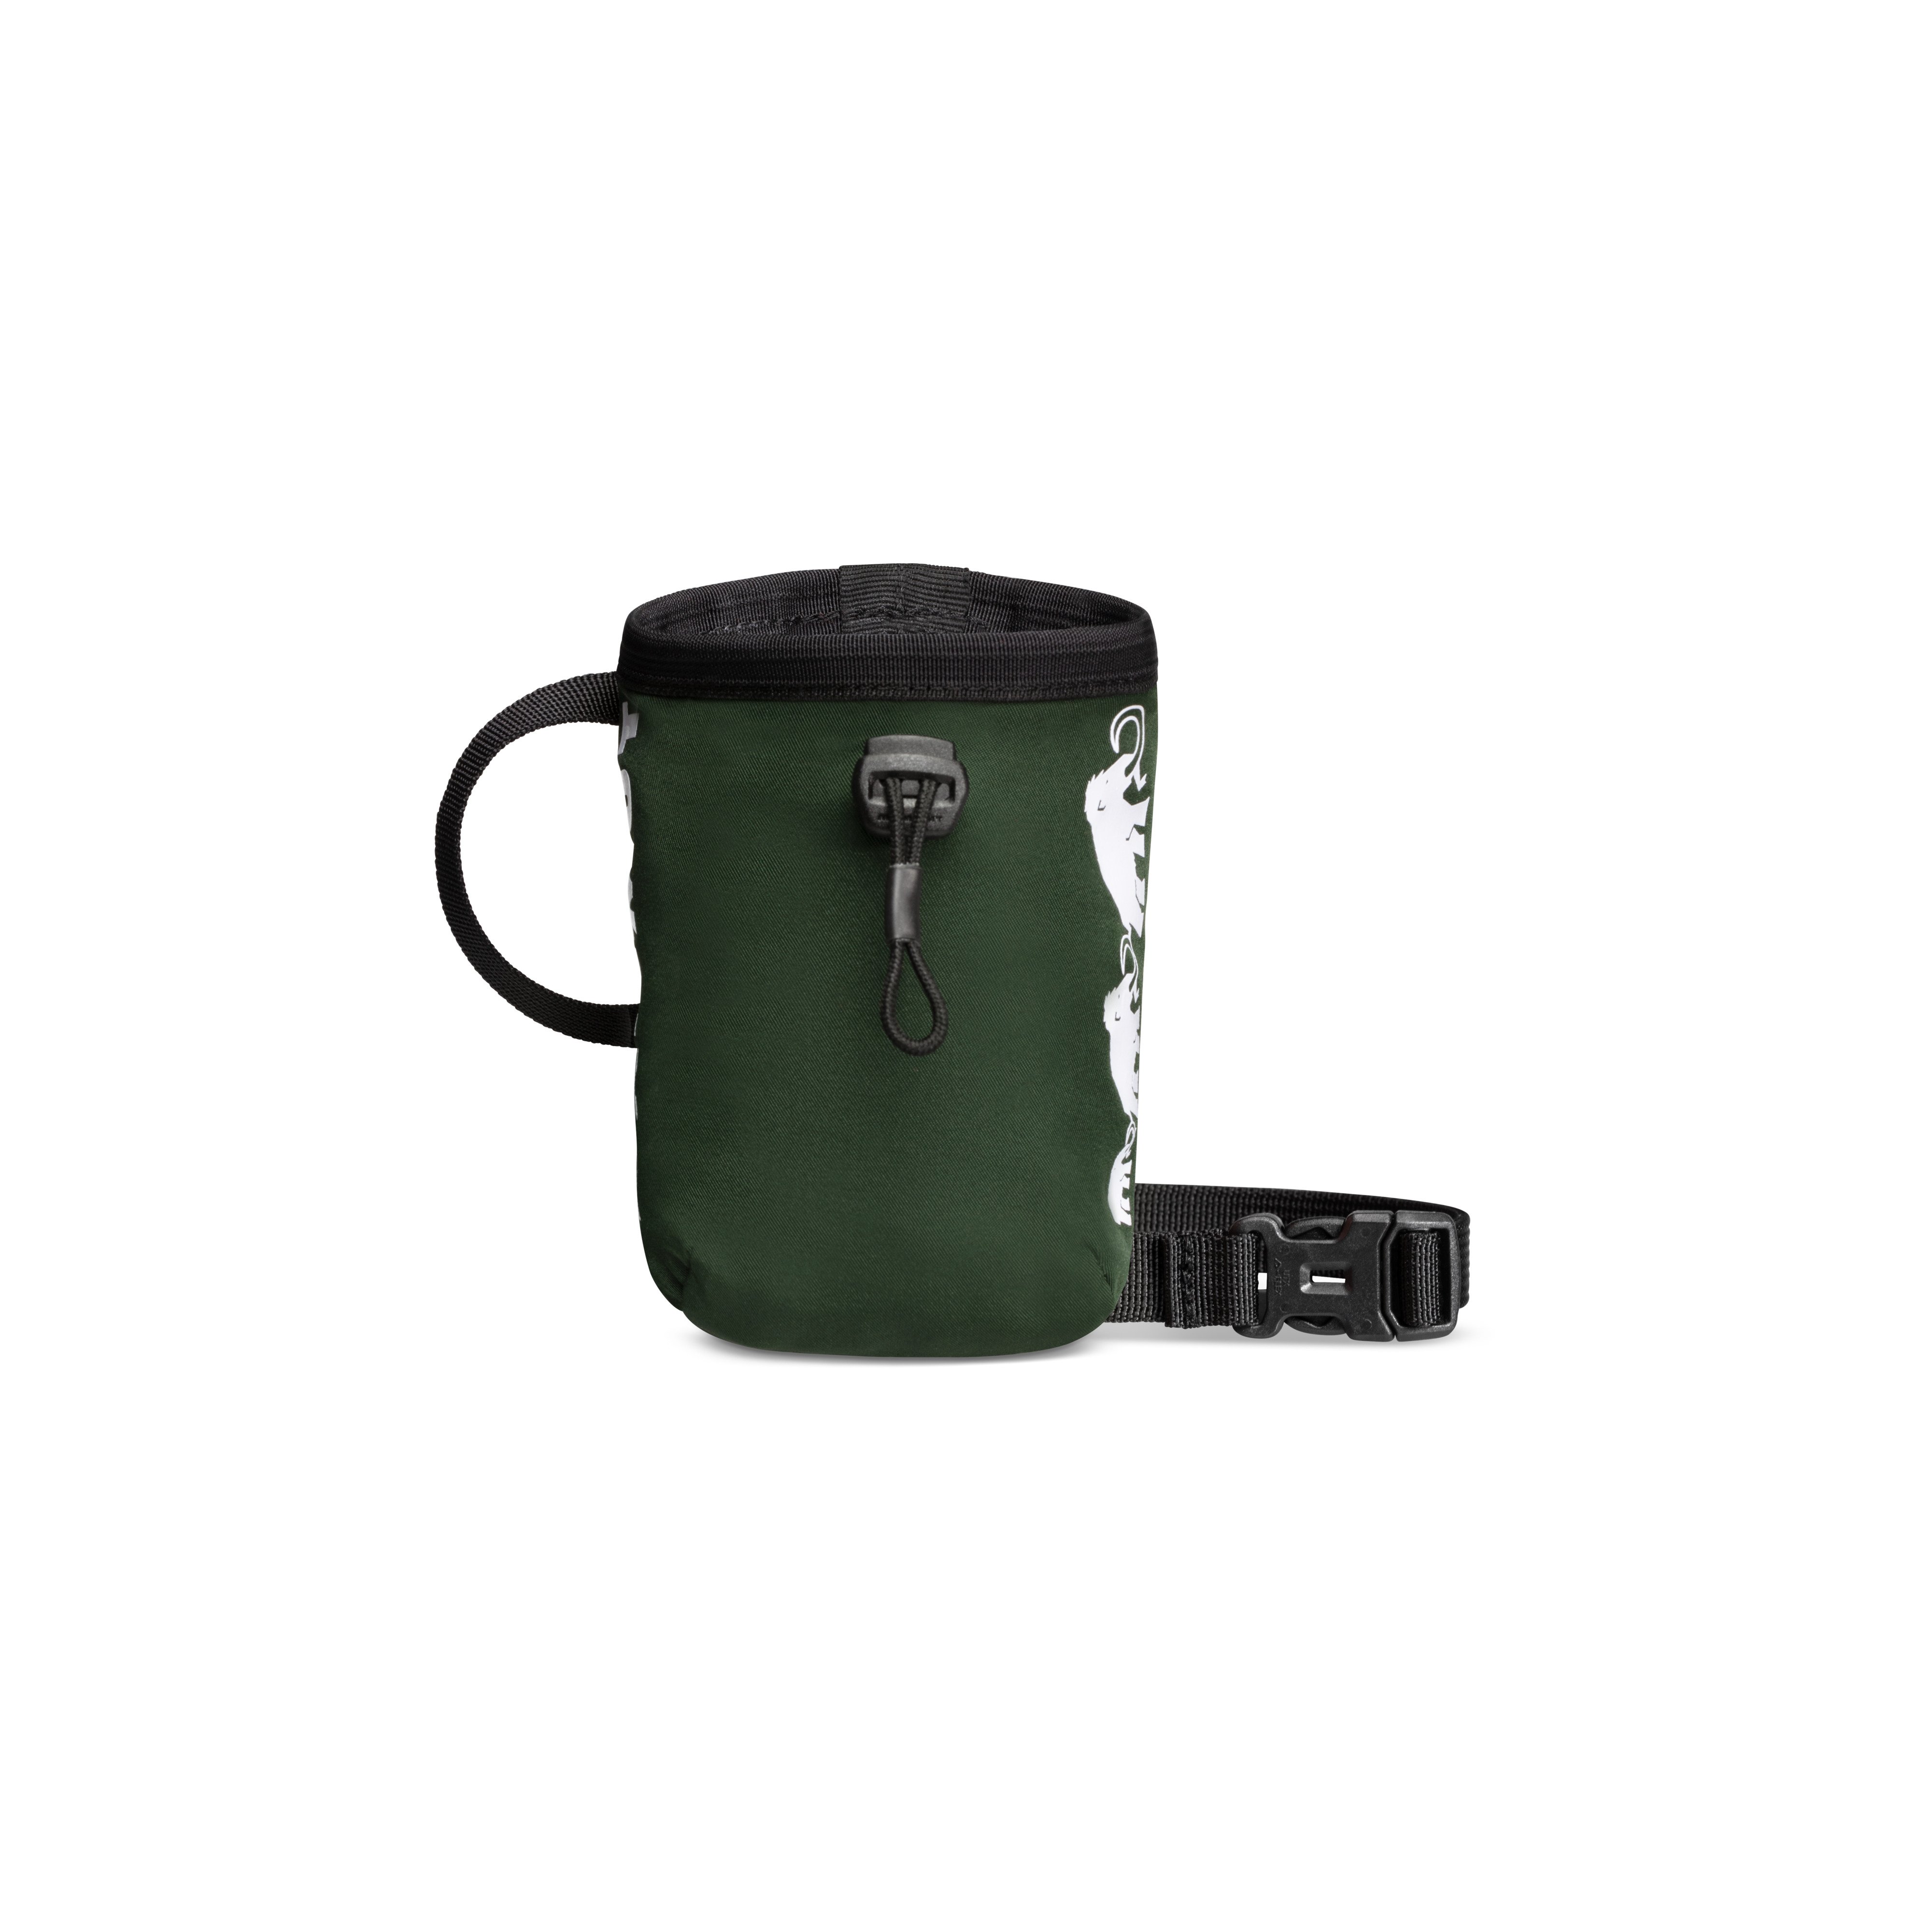 First Crag Chalk Bag - woods, one size product image